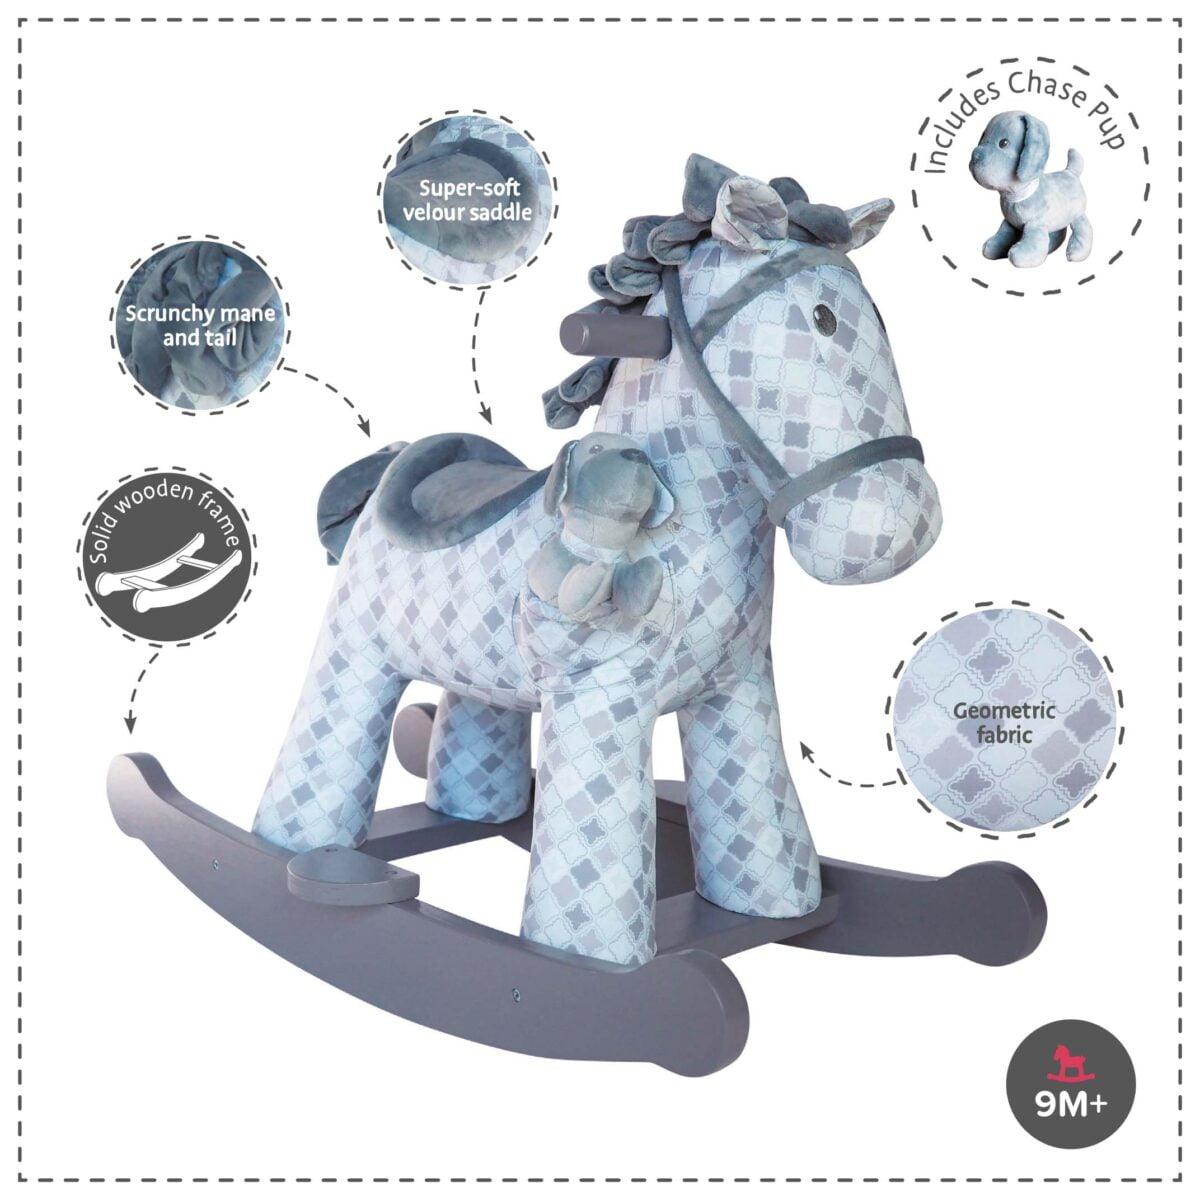 Features and benefits displayed for Harper & Chase Rocking Horse